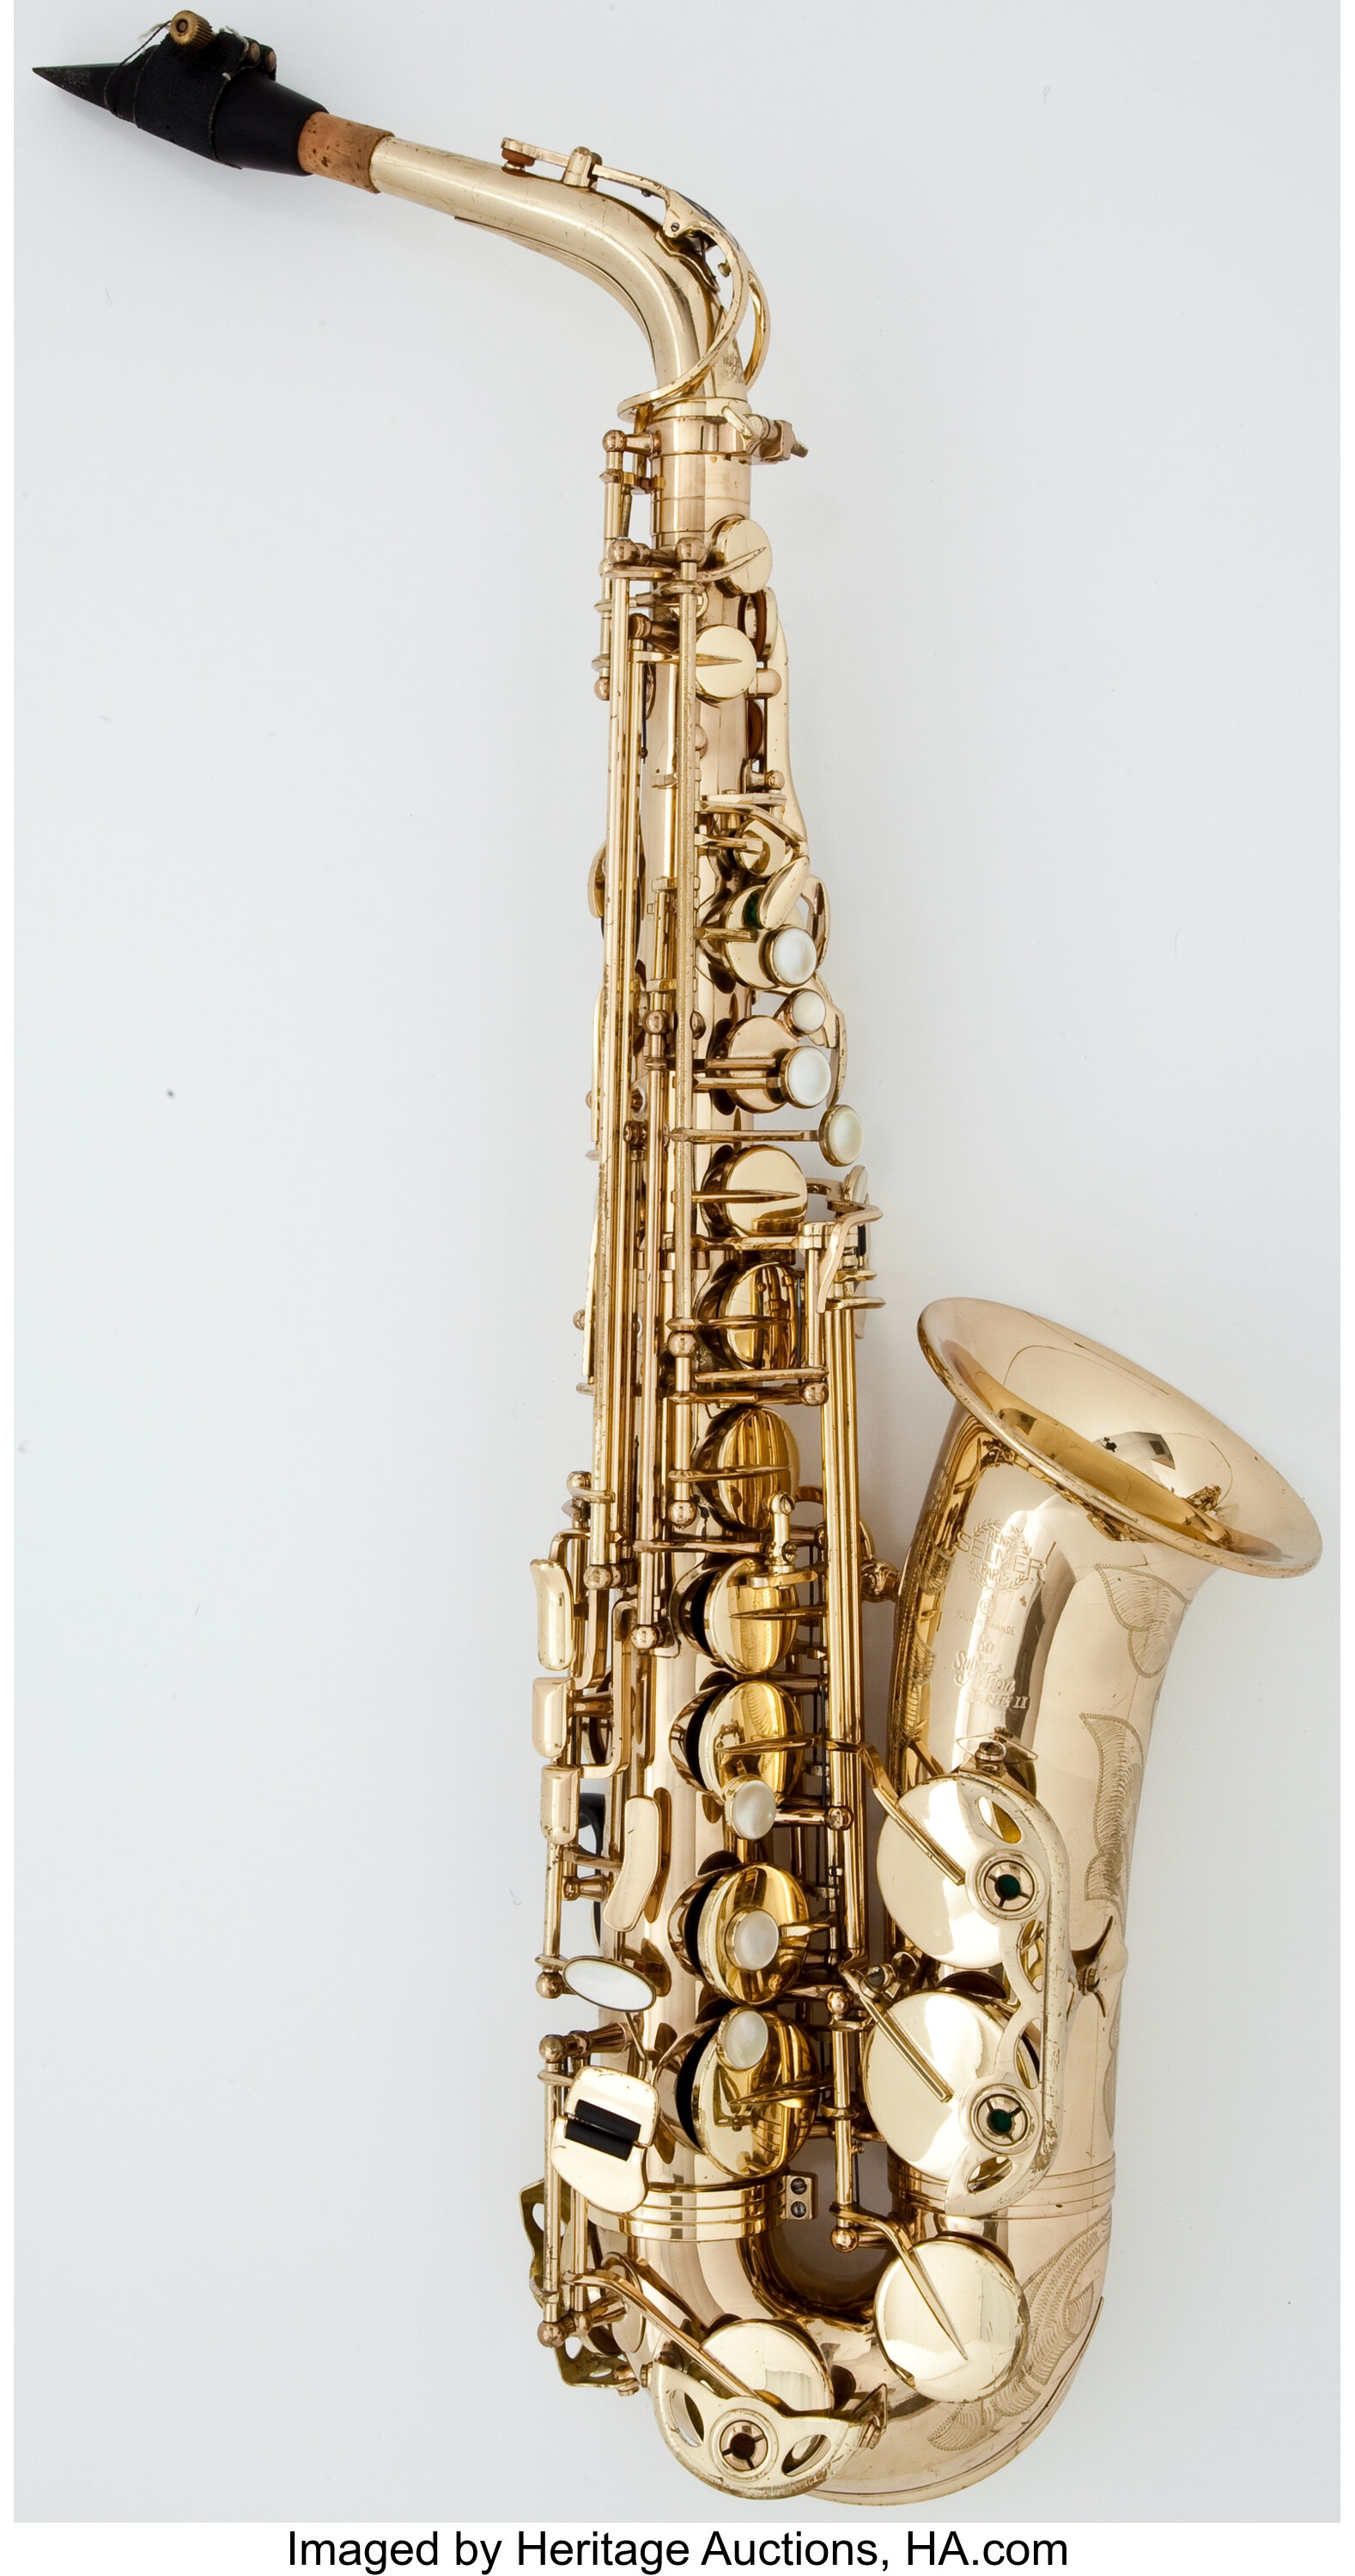 Location saxophone serial number Locating The